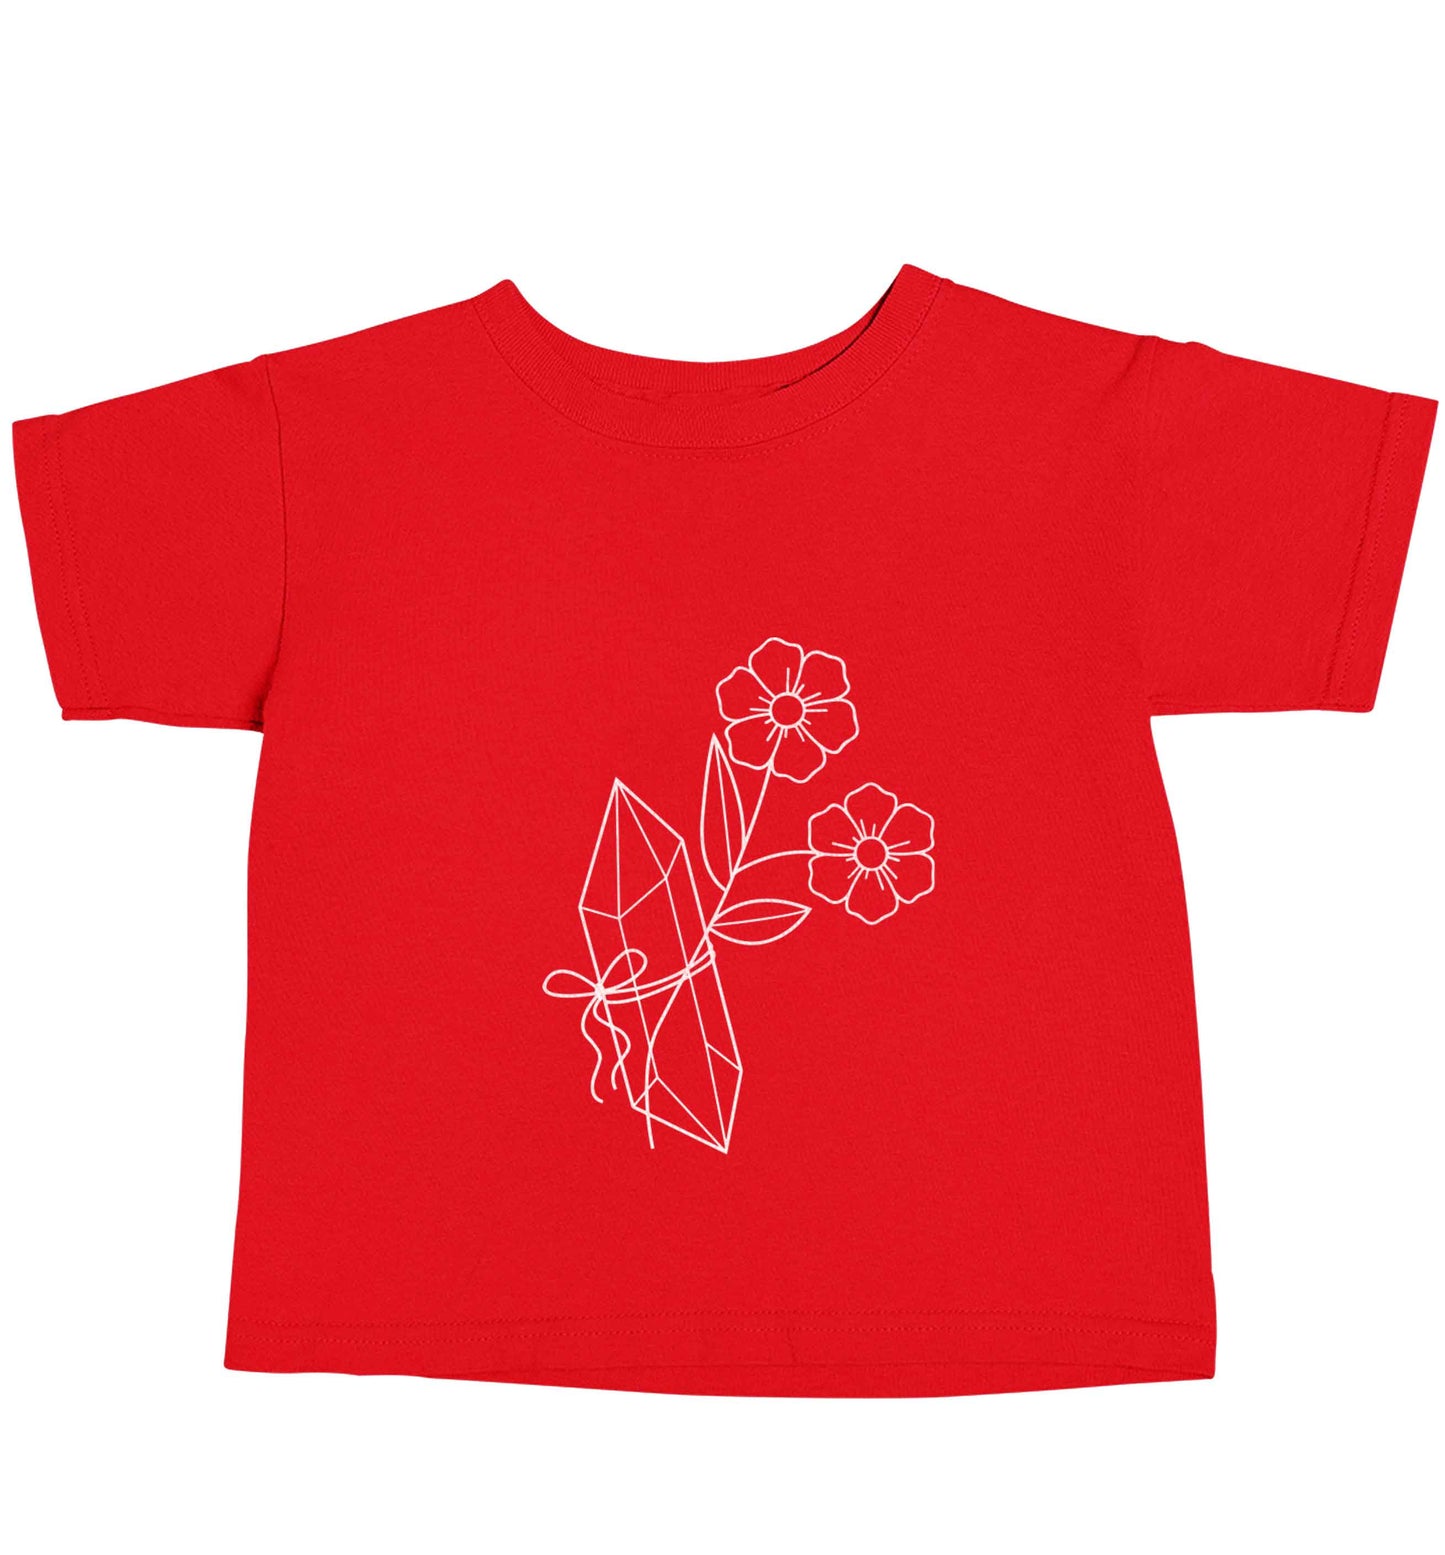 Crystal flower illustration red baby toddler Tshirt 2 Years